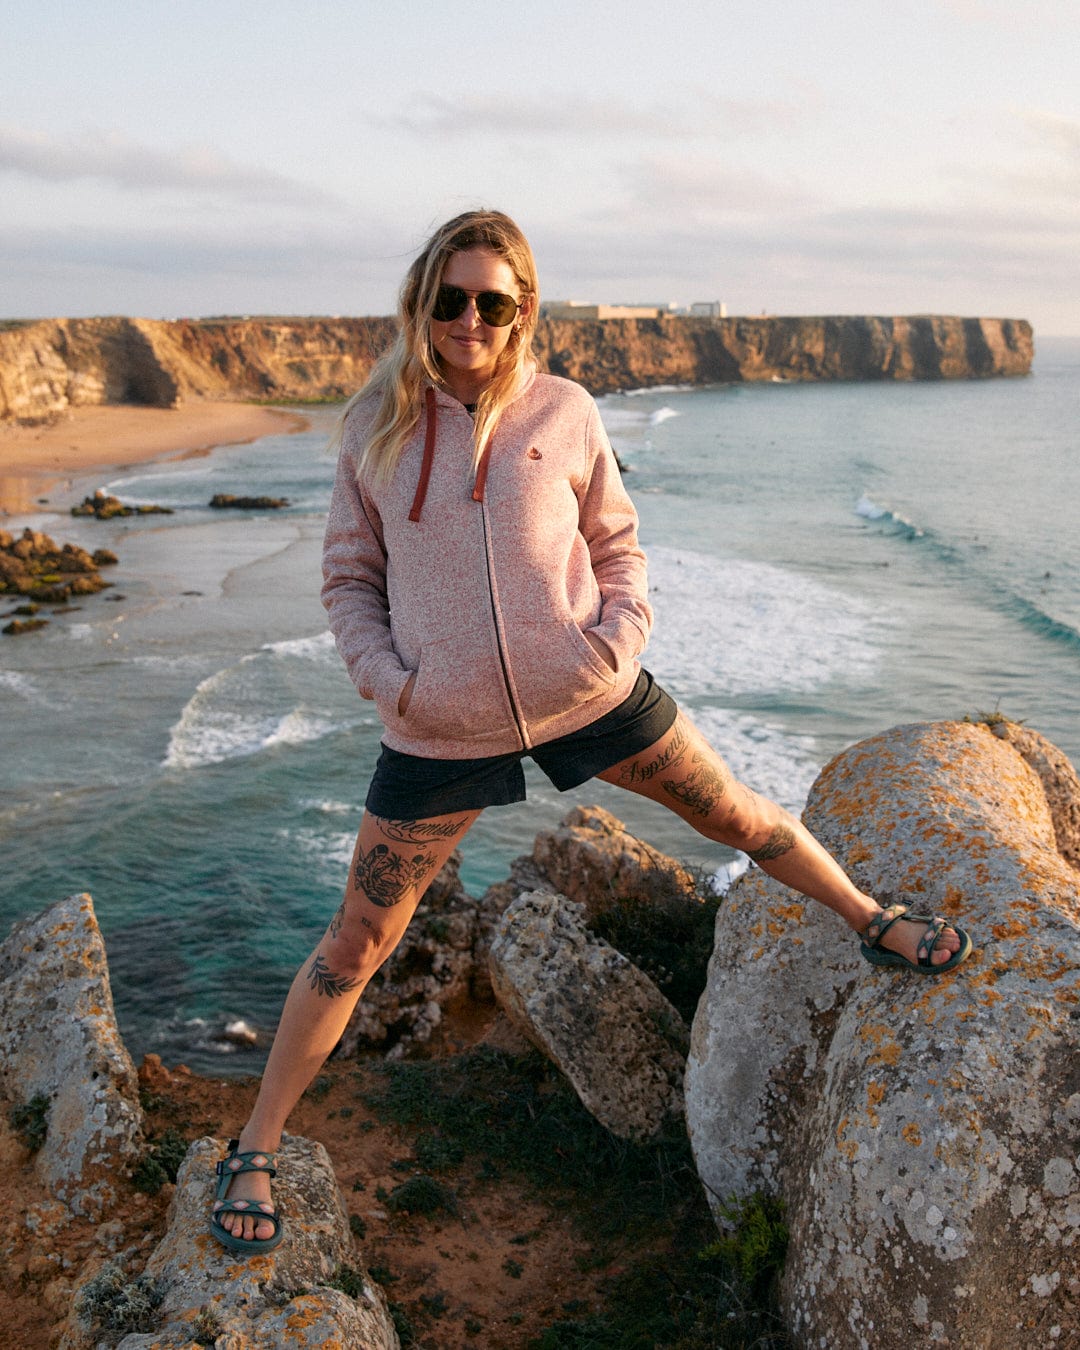 A woman in a Farley - Womens Borg Lined Hoodie in Pink by Saltrock is posing on rocks by the ocean.